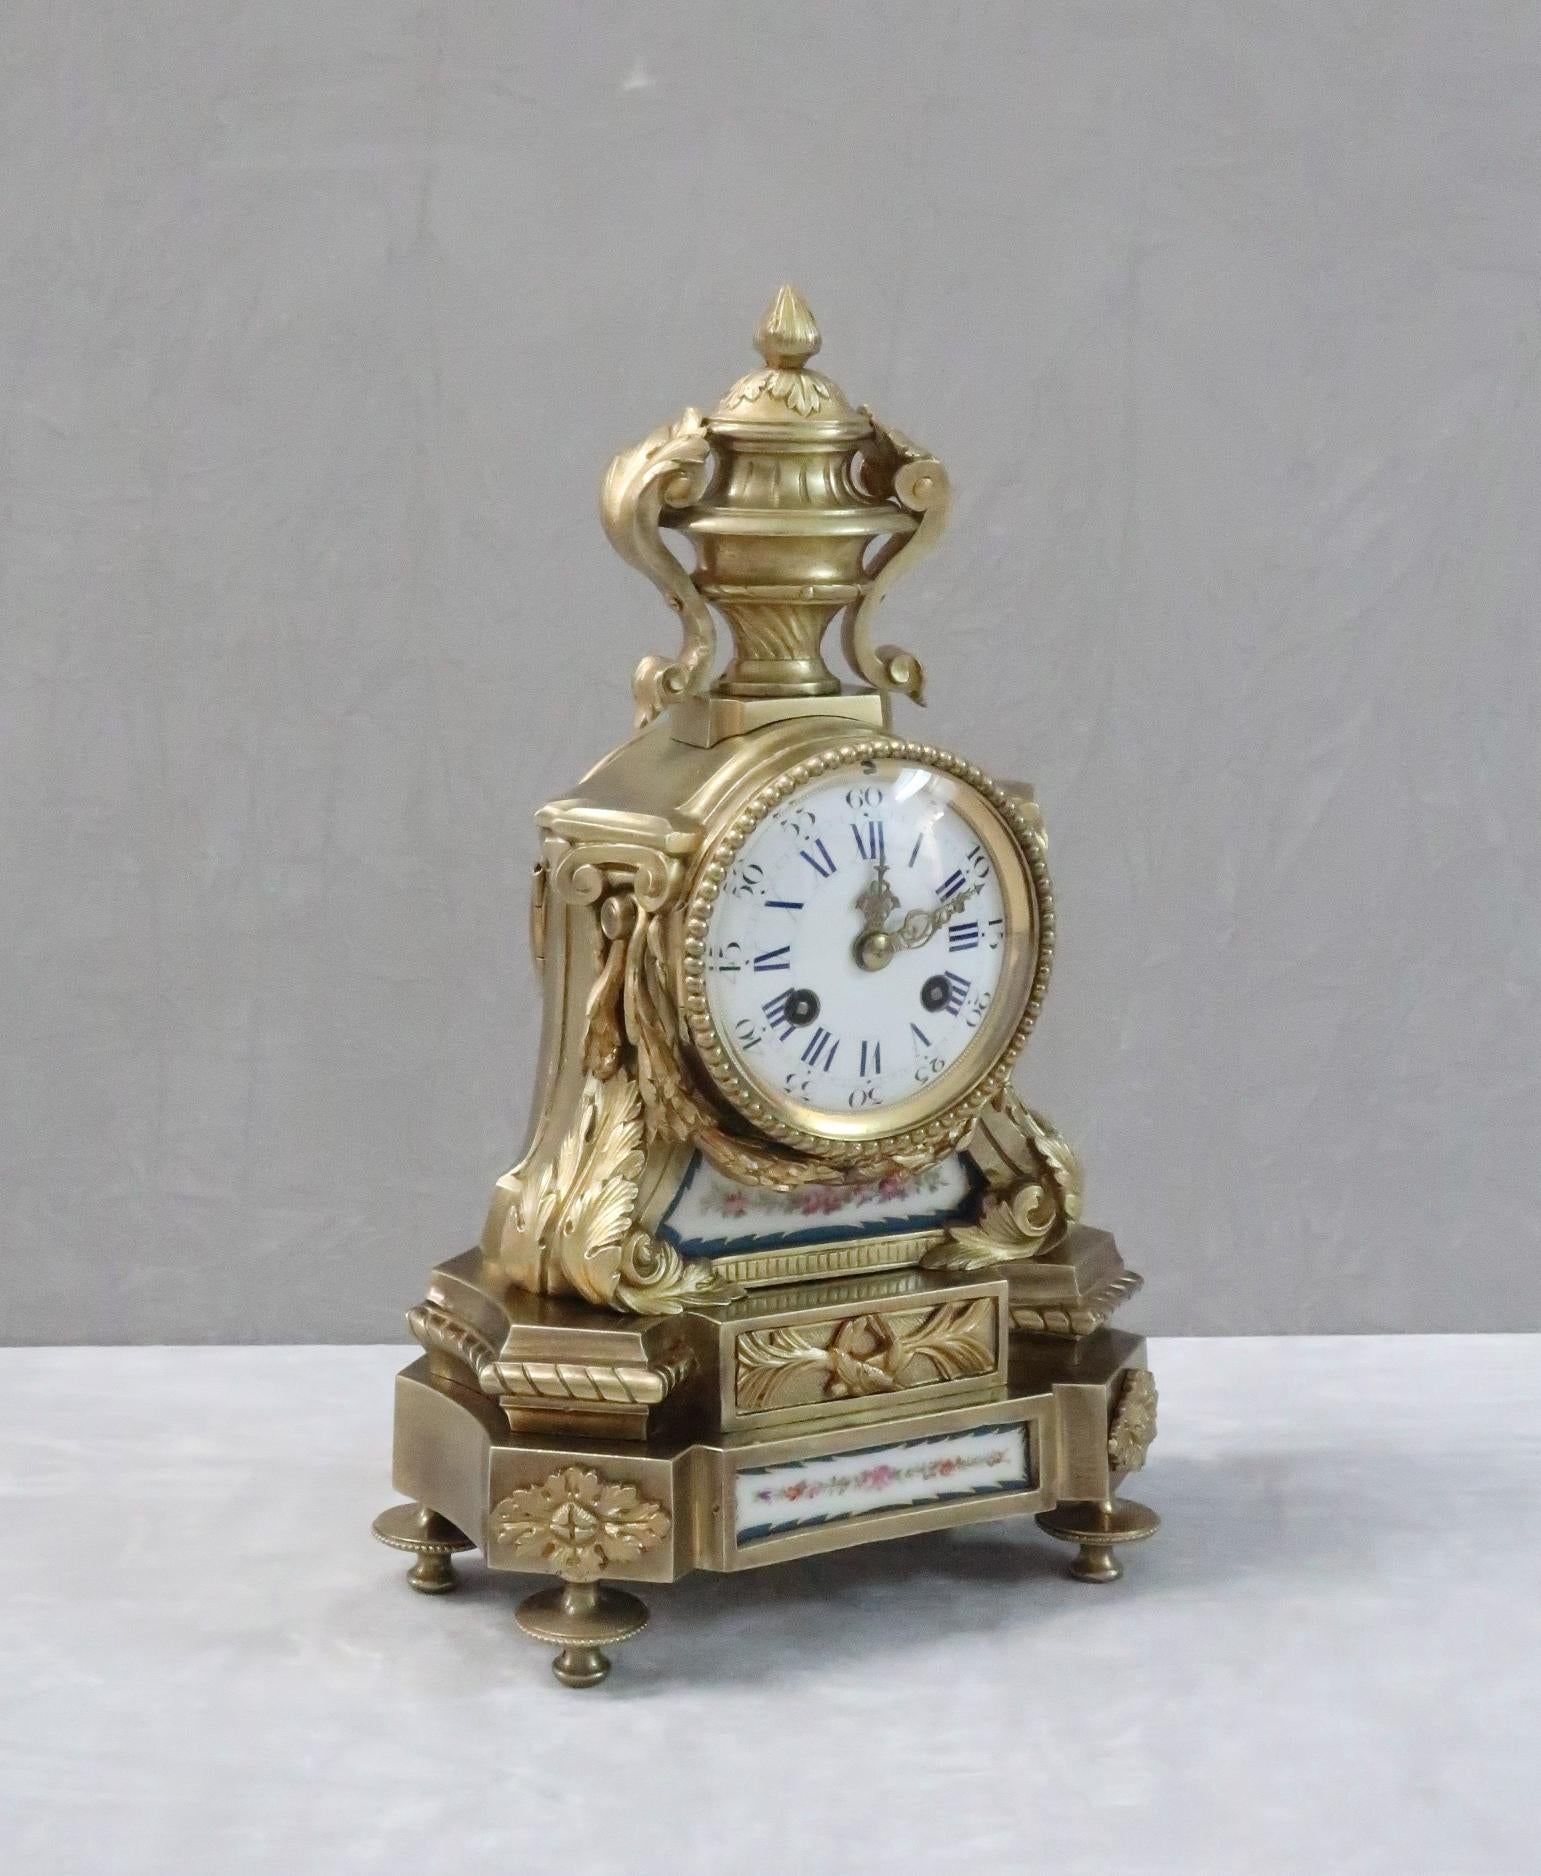 A very good quality French Napoleon III bronze gilt mantel clock with decorative leaf design, swags, beaded detail and urn to the top with inset hand painted floral Sevres style porcelain panels within a blue border. The clock has a French eight day